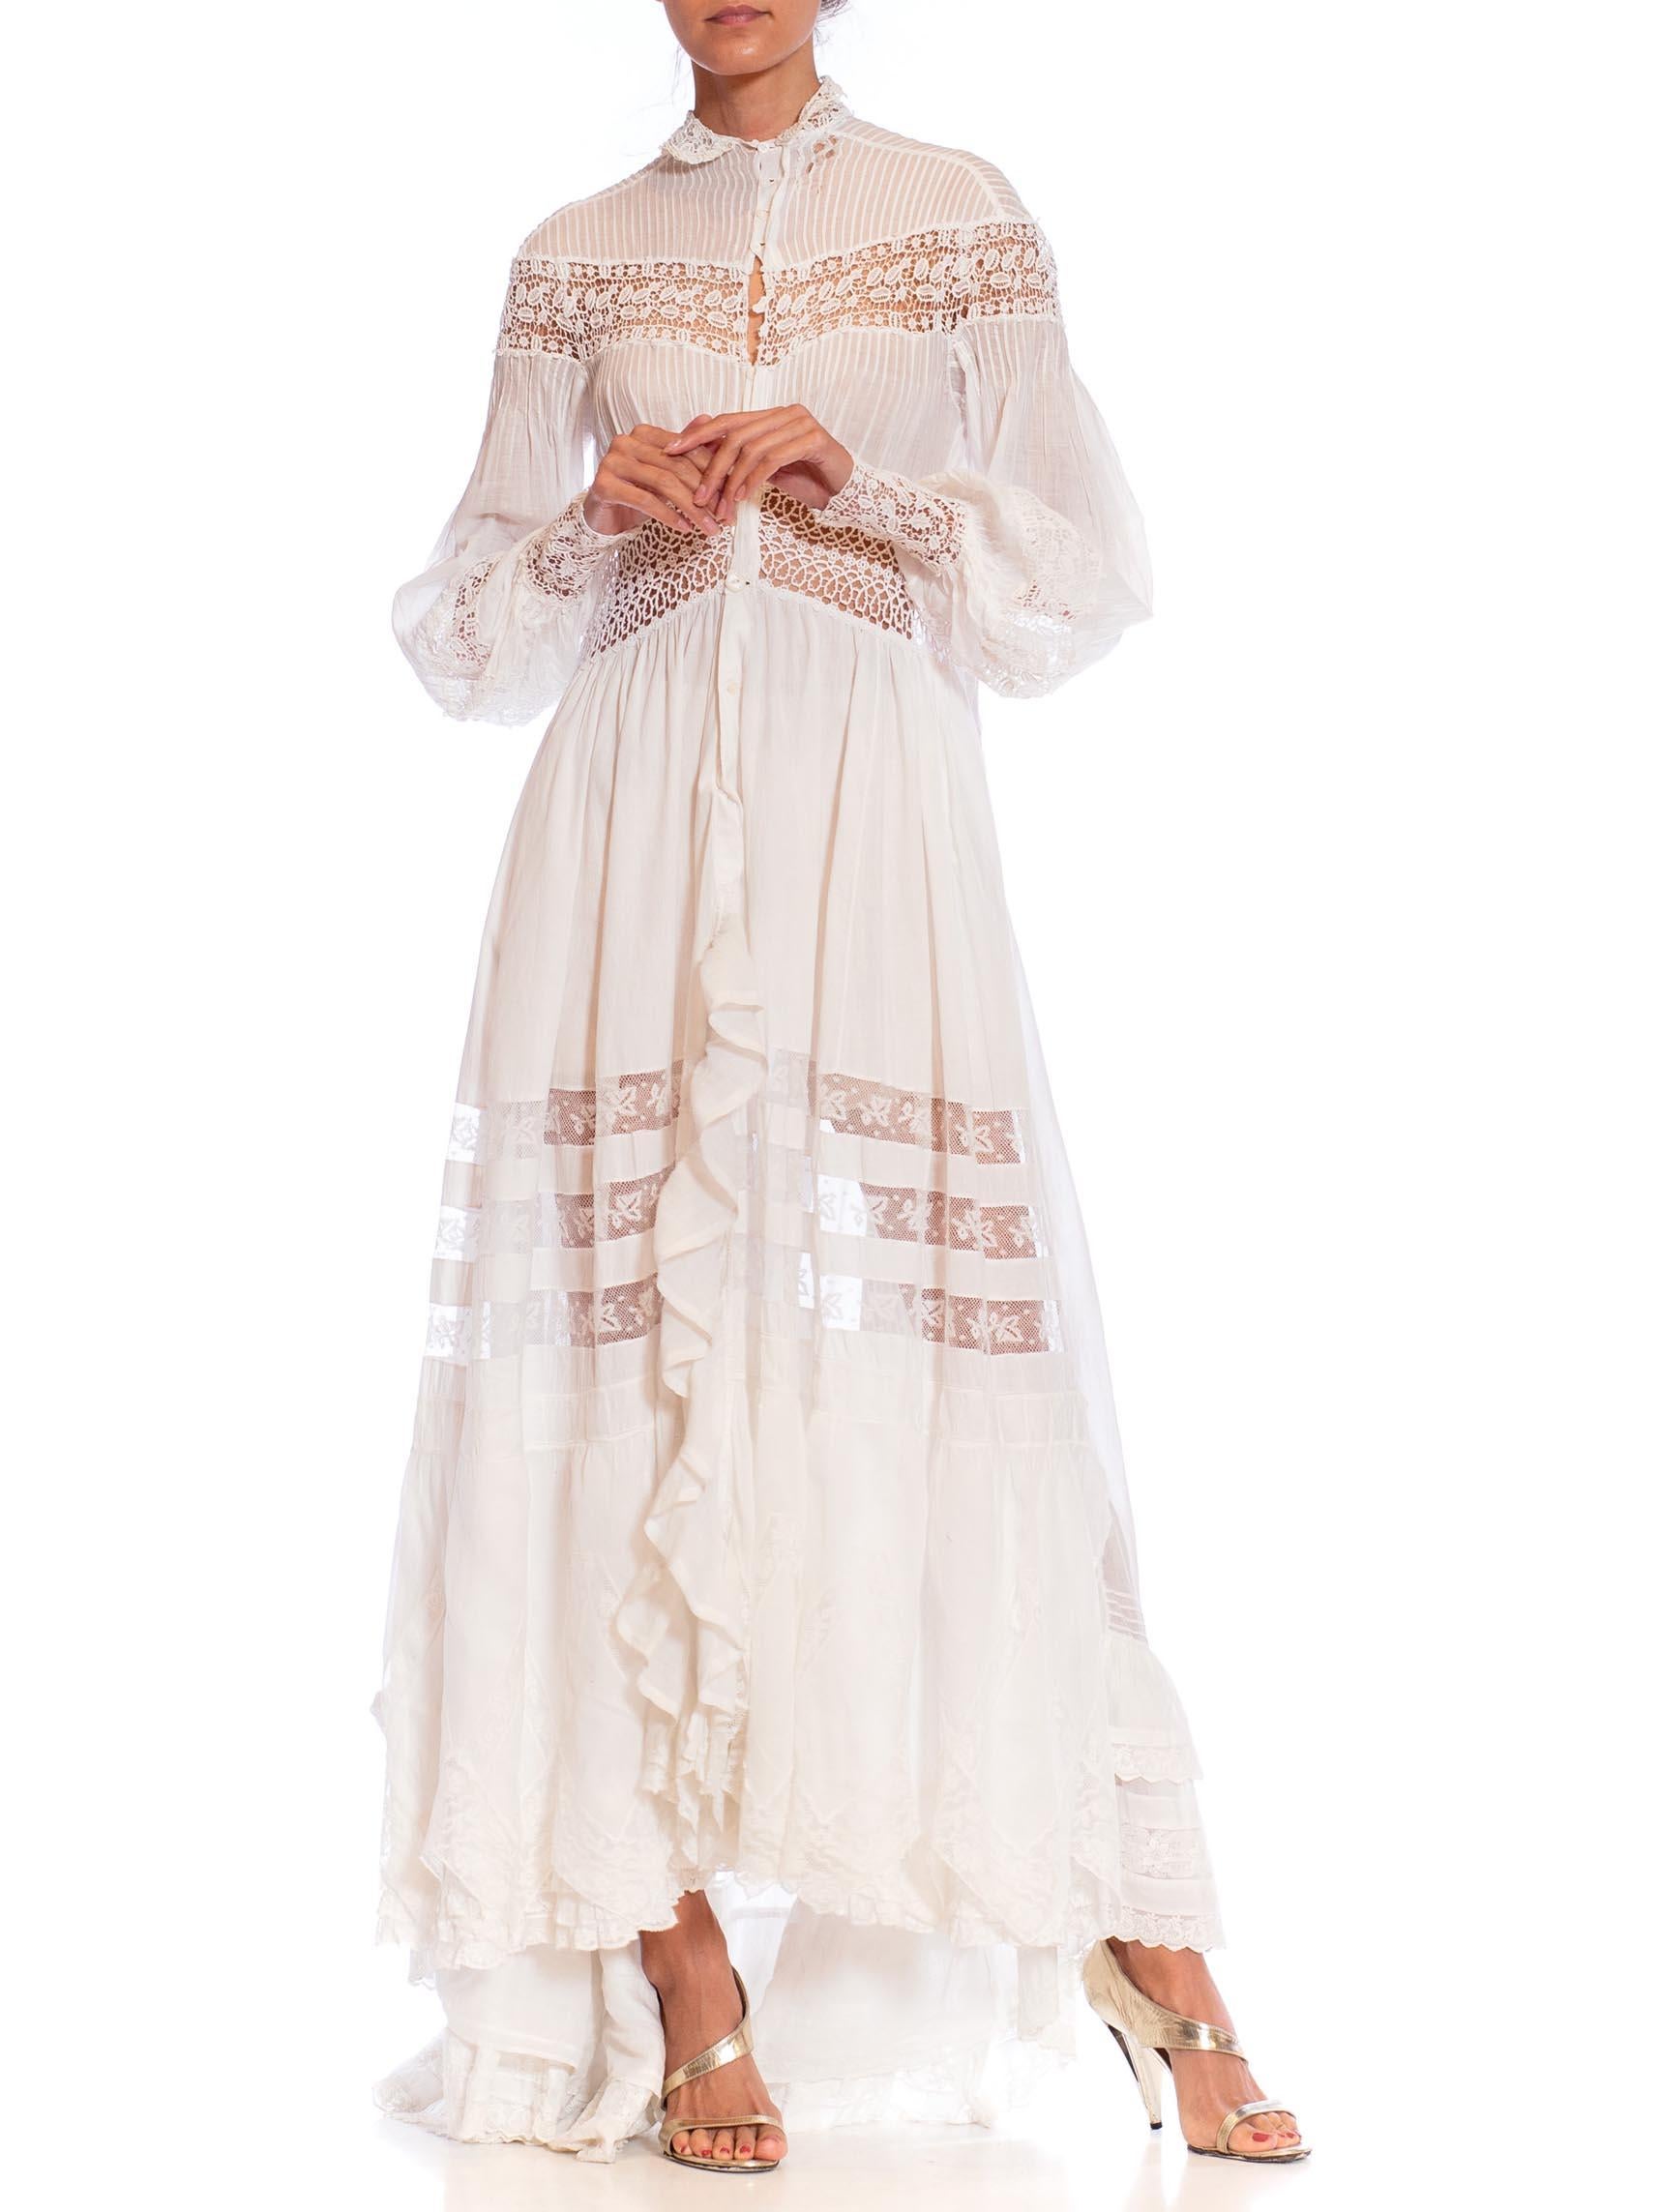 Morphew Atelier White Victorian Cotton & Lace Oversized Gown In Excellent Condition For Sale In New York, NY